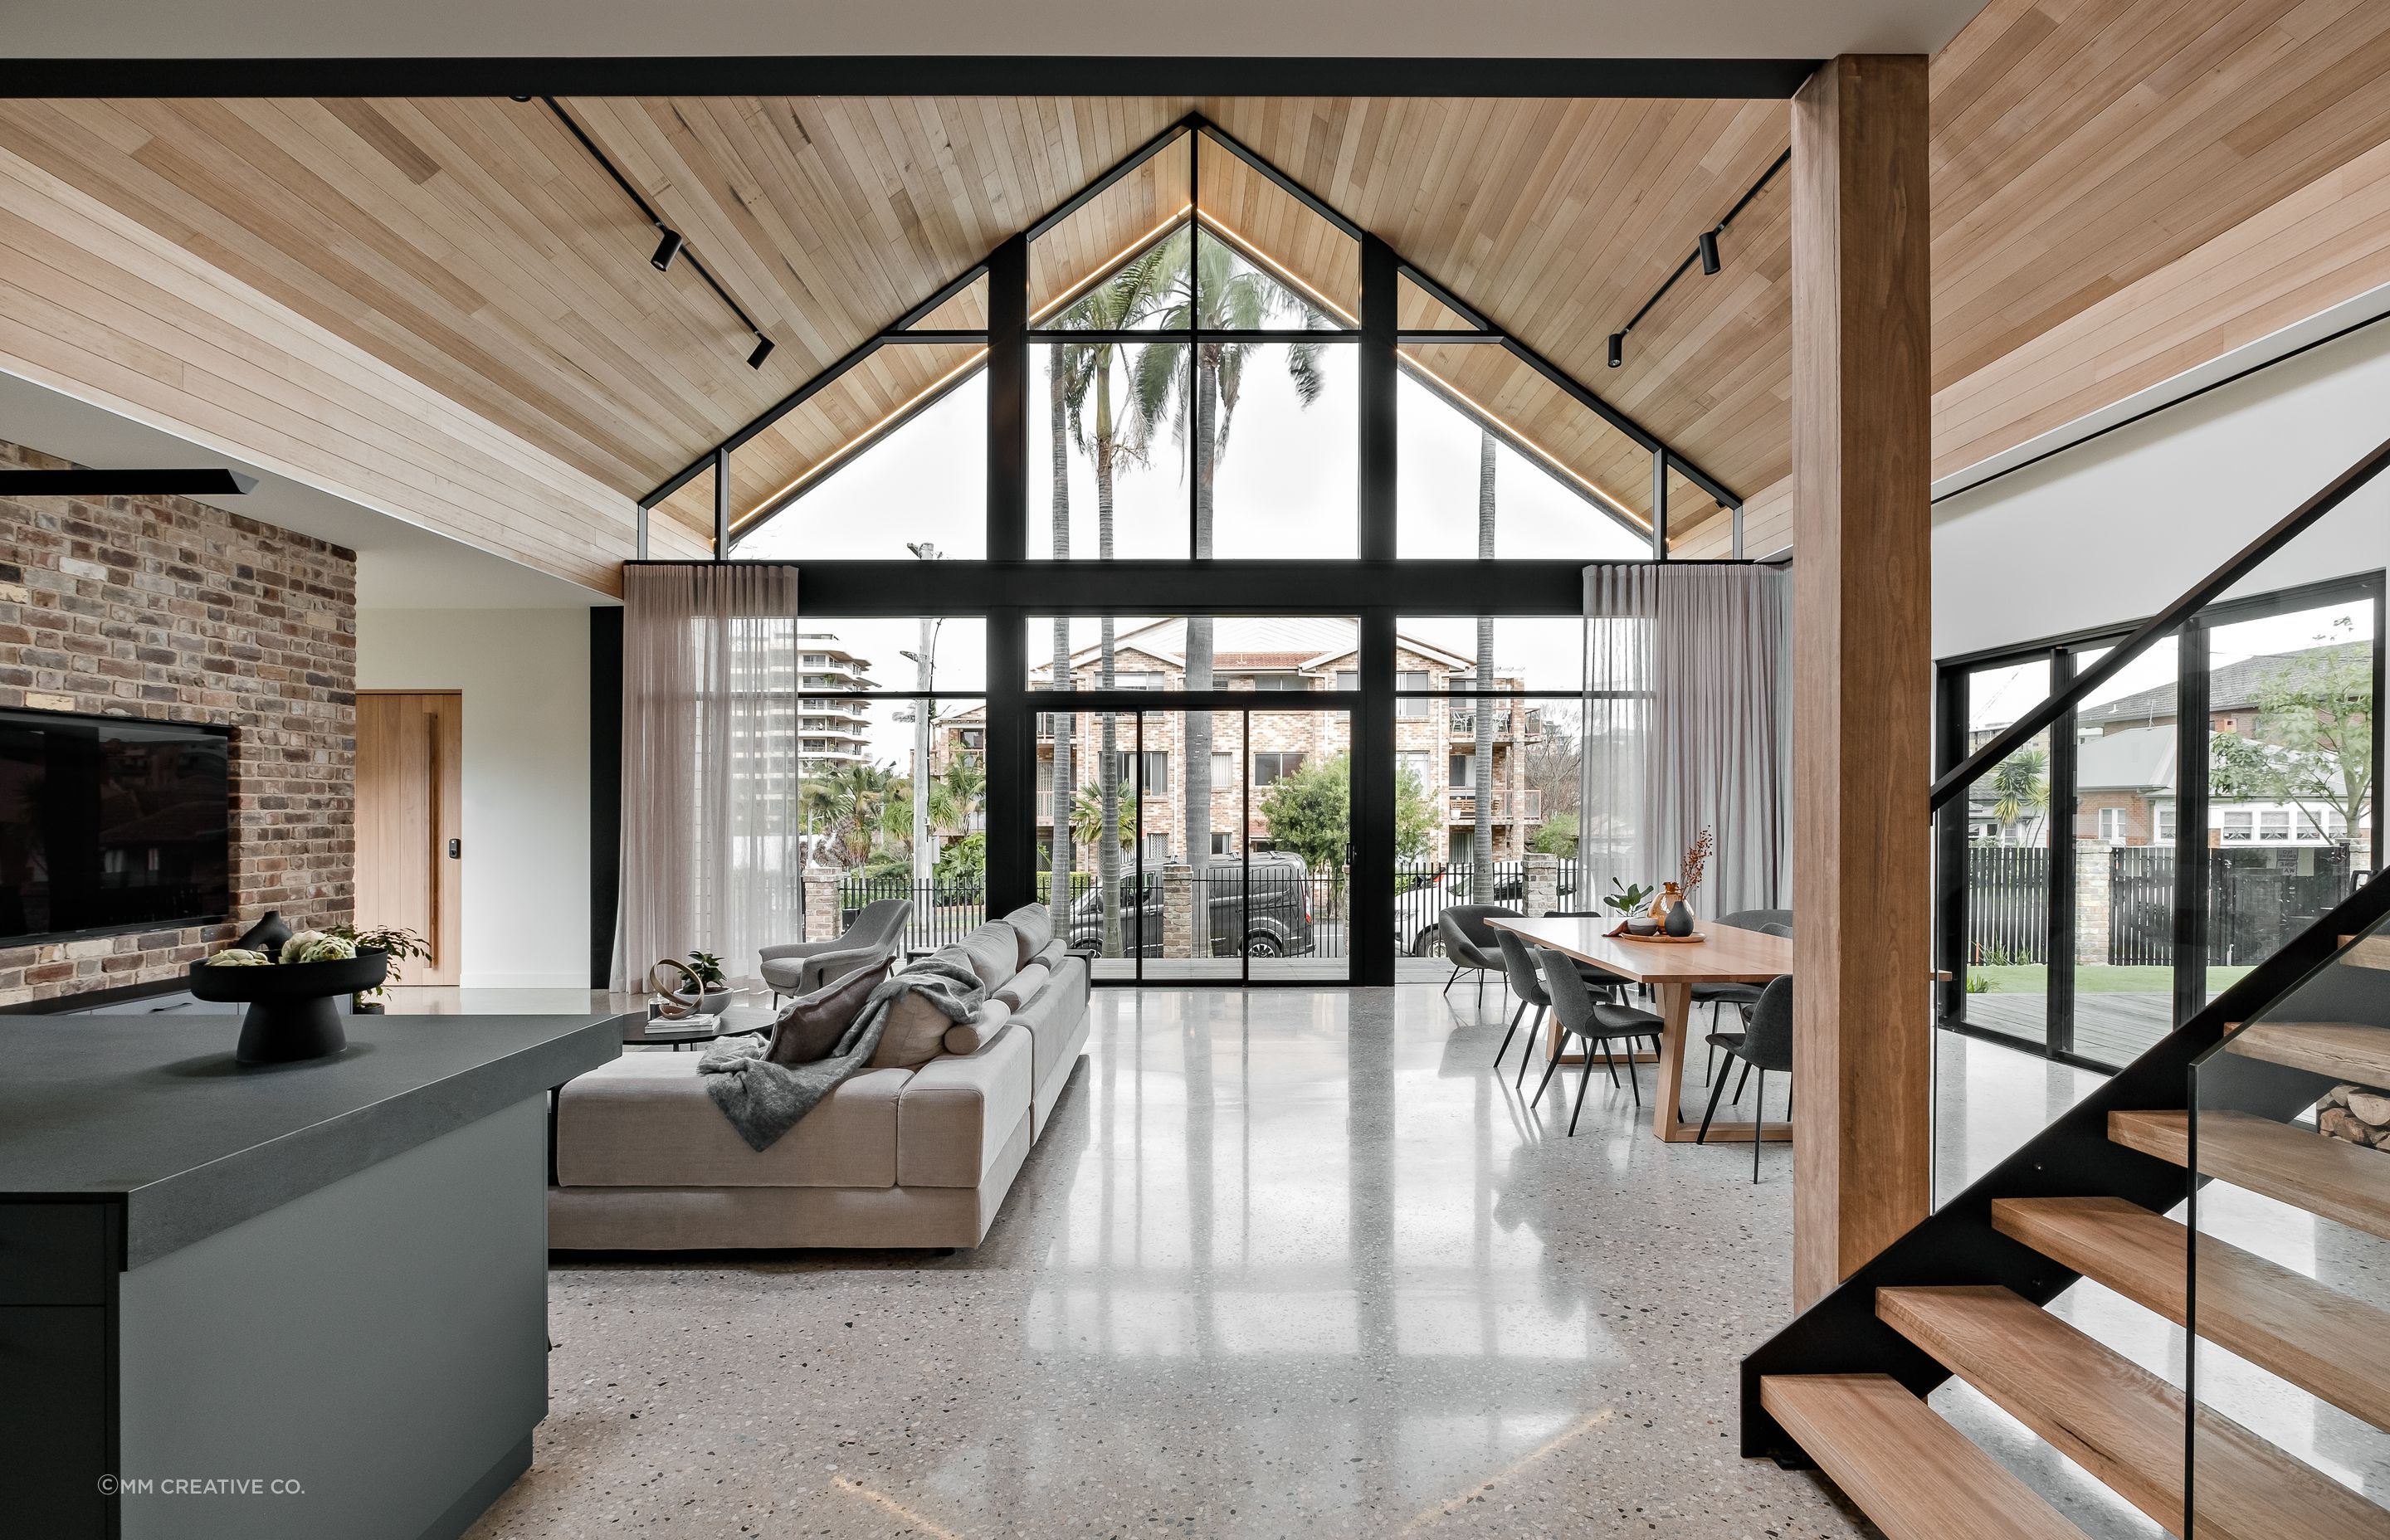 The timber lining on the ceilings is carried outside into the soffits; the simple A-frame architecture allows the materiality to take centre stage.